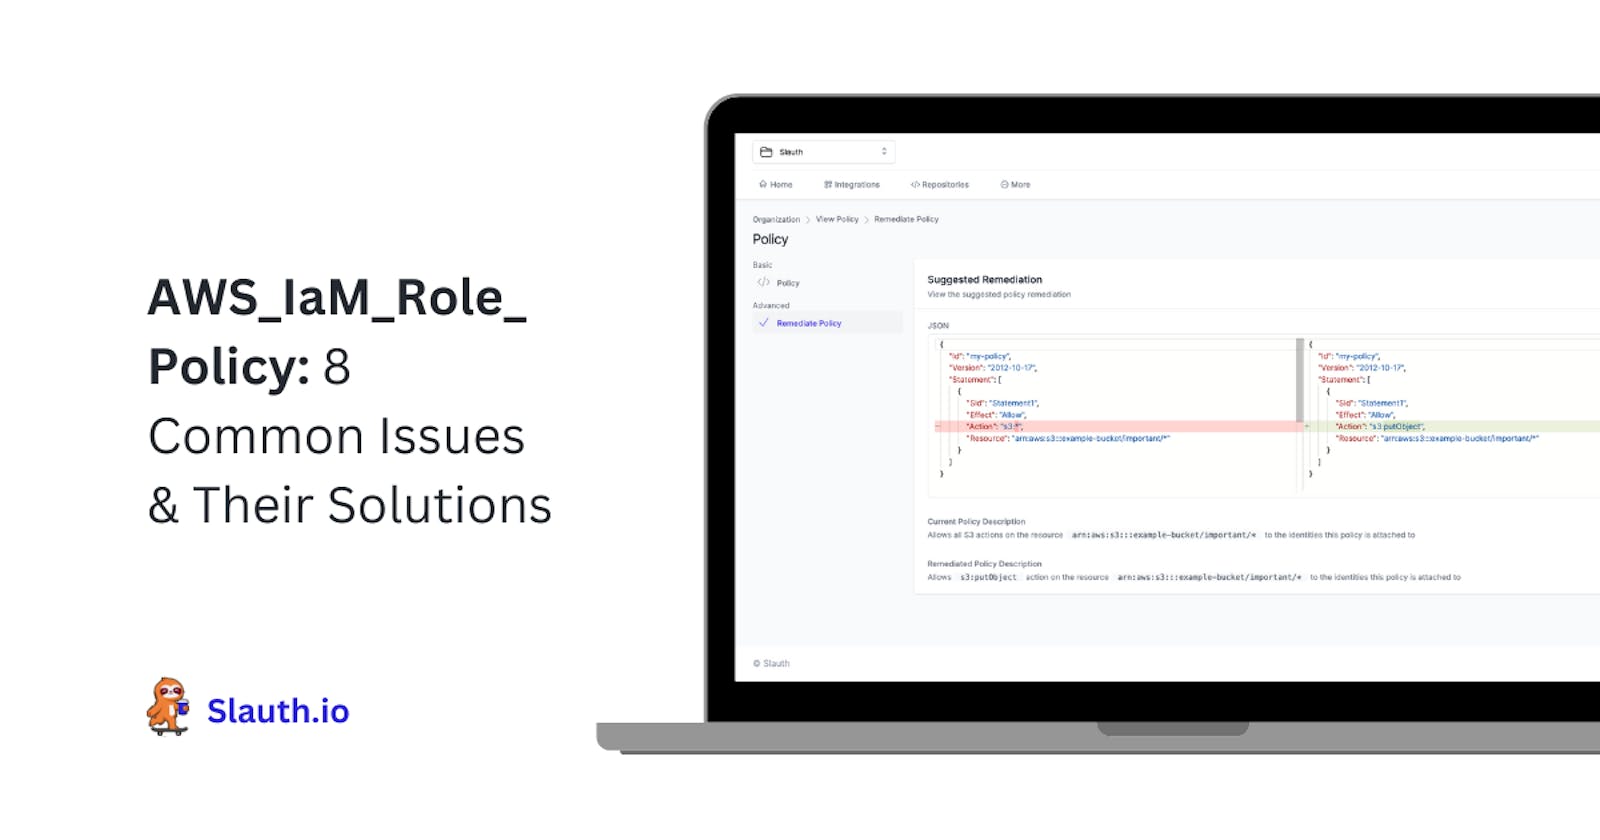 AWS_IaM_Role_Policy: 8 Common Issues & Their Solutions